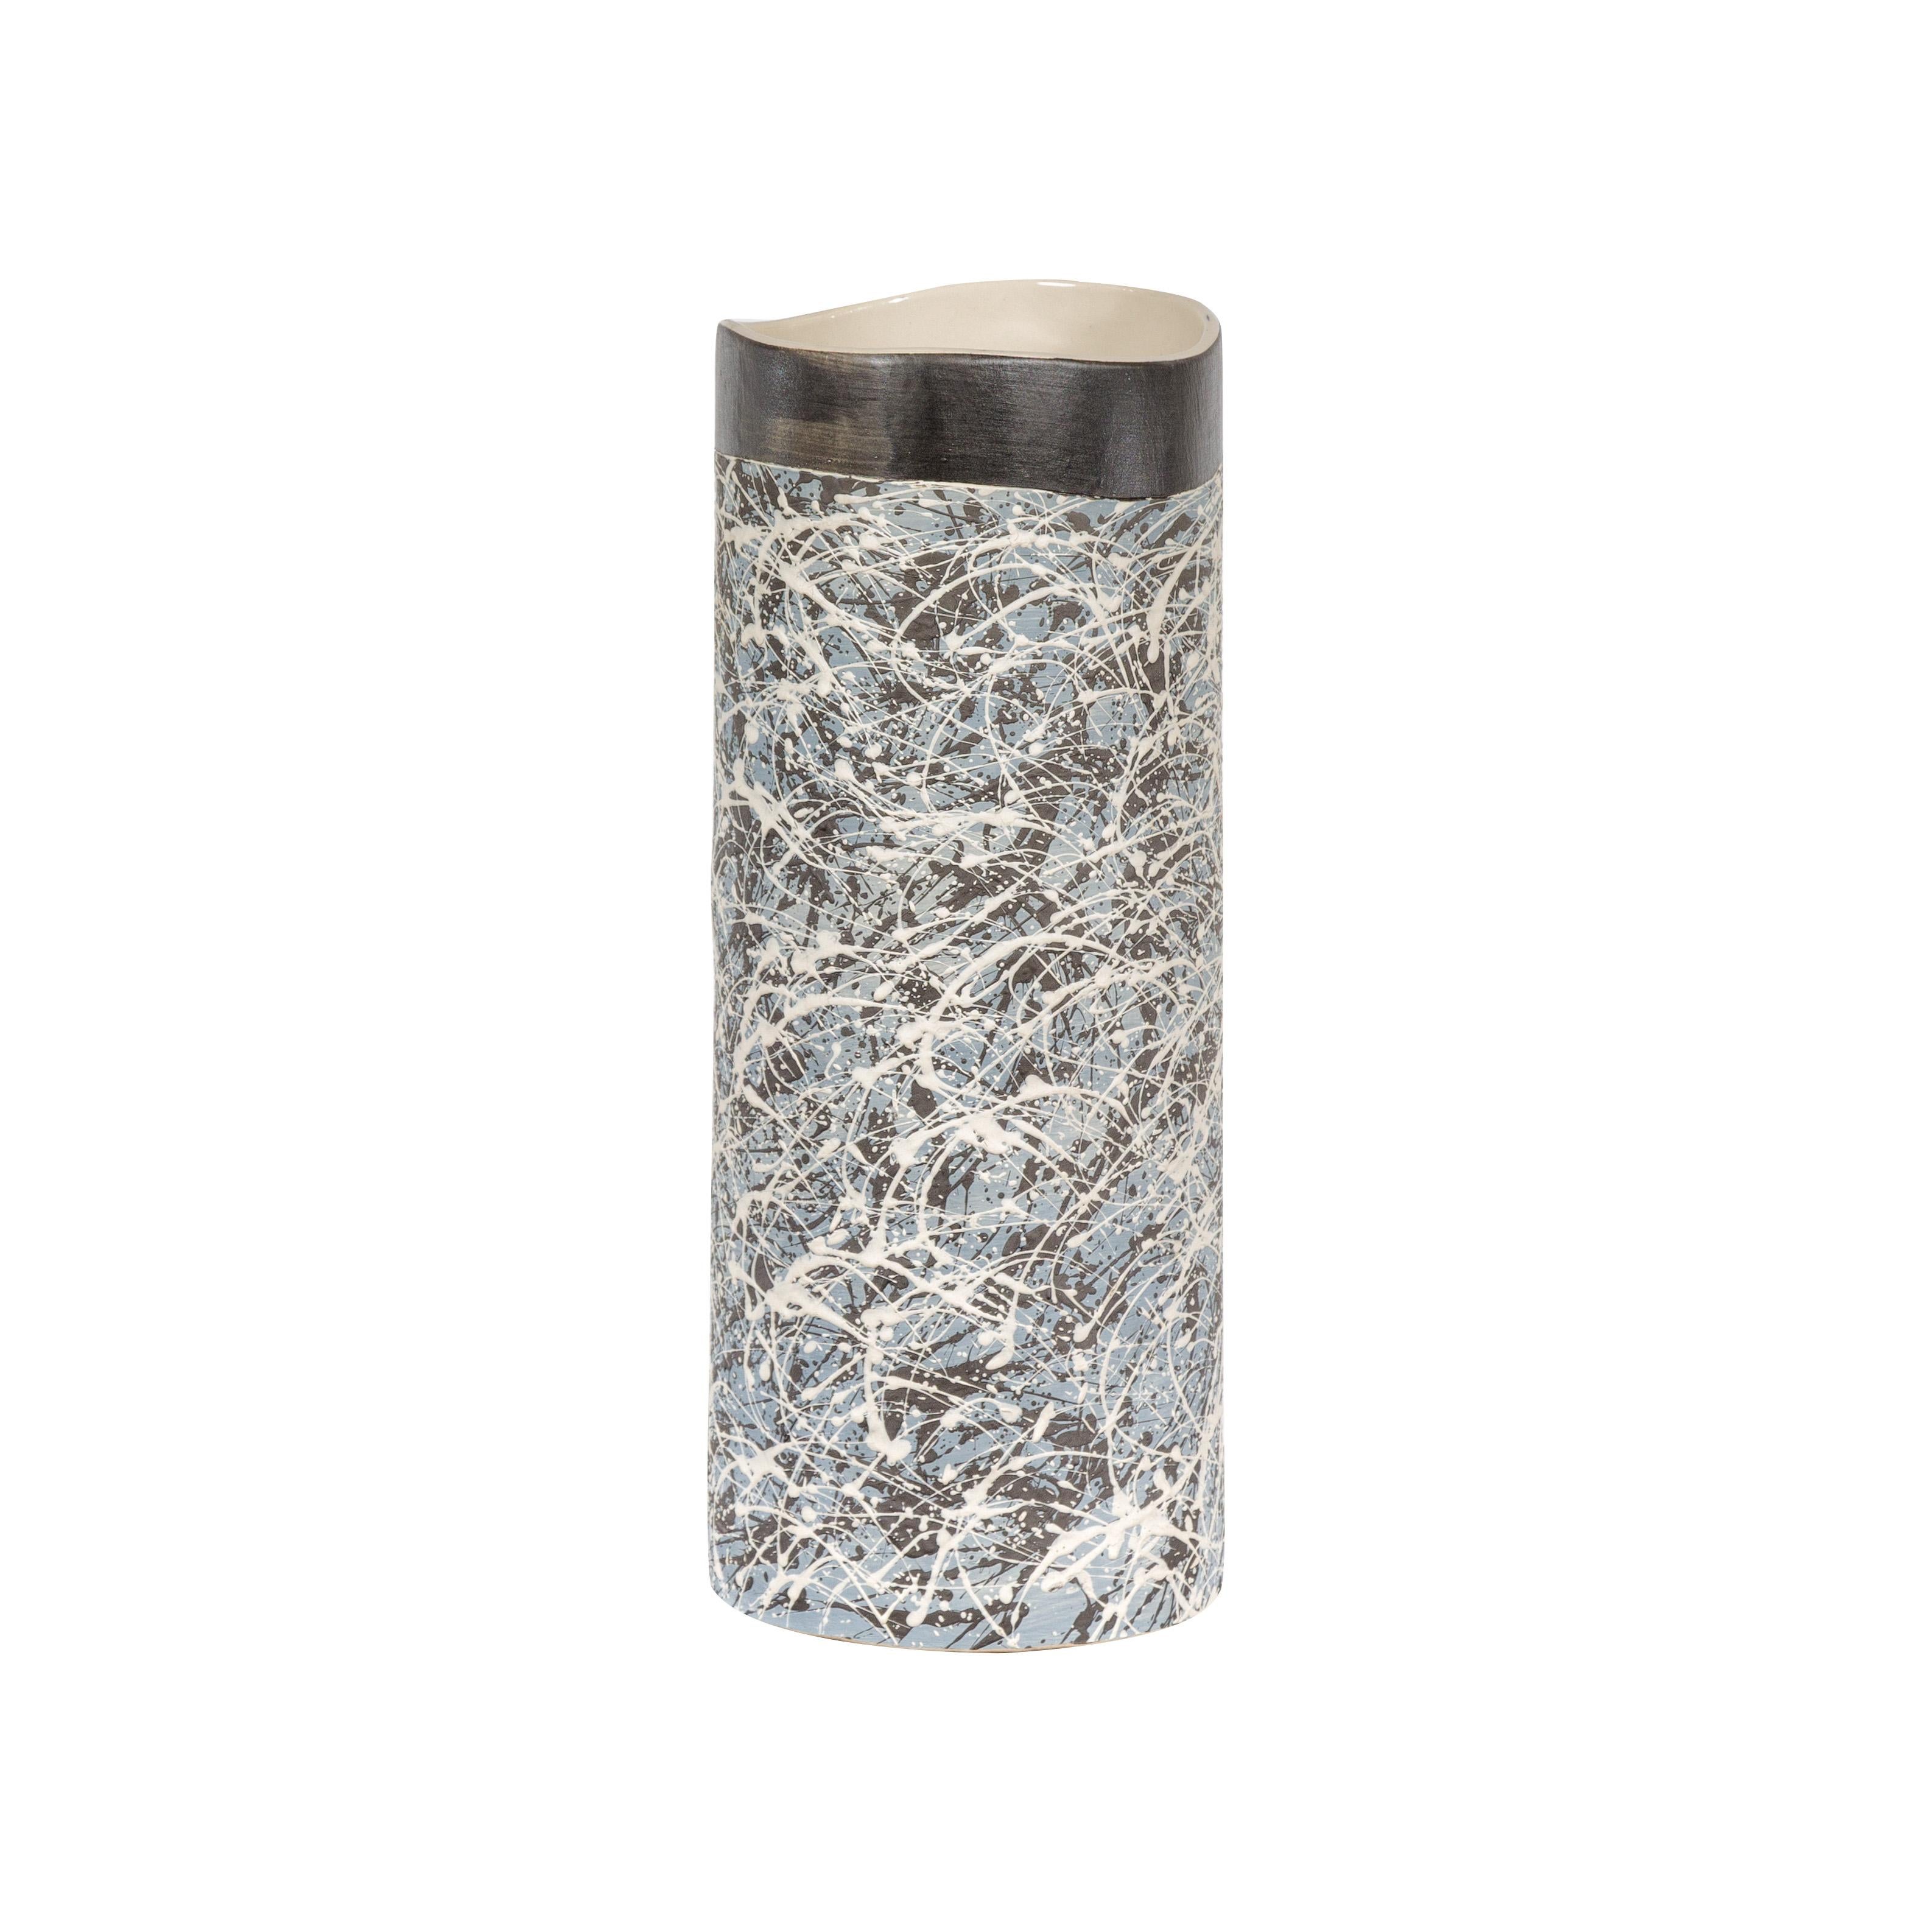 Textured Blue Gray, White, Brown and Black Spattered Ceramic Vase For Sale 13